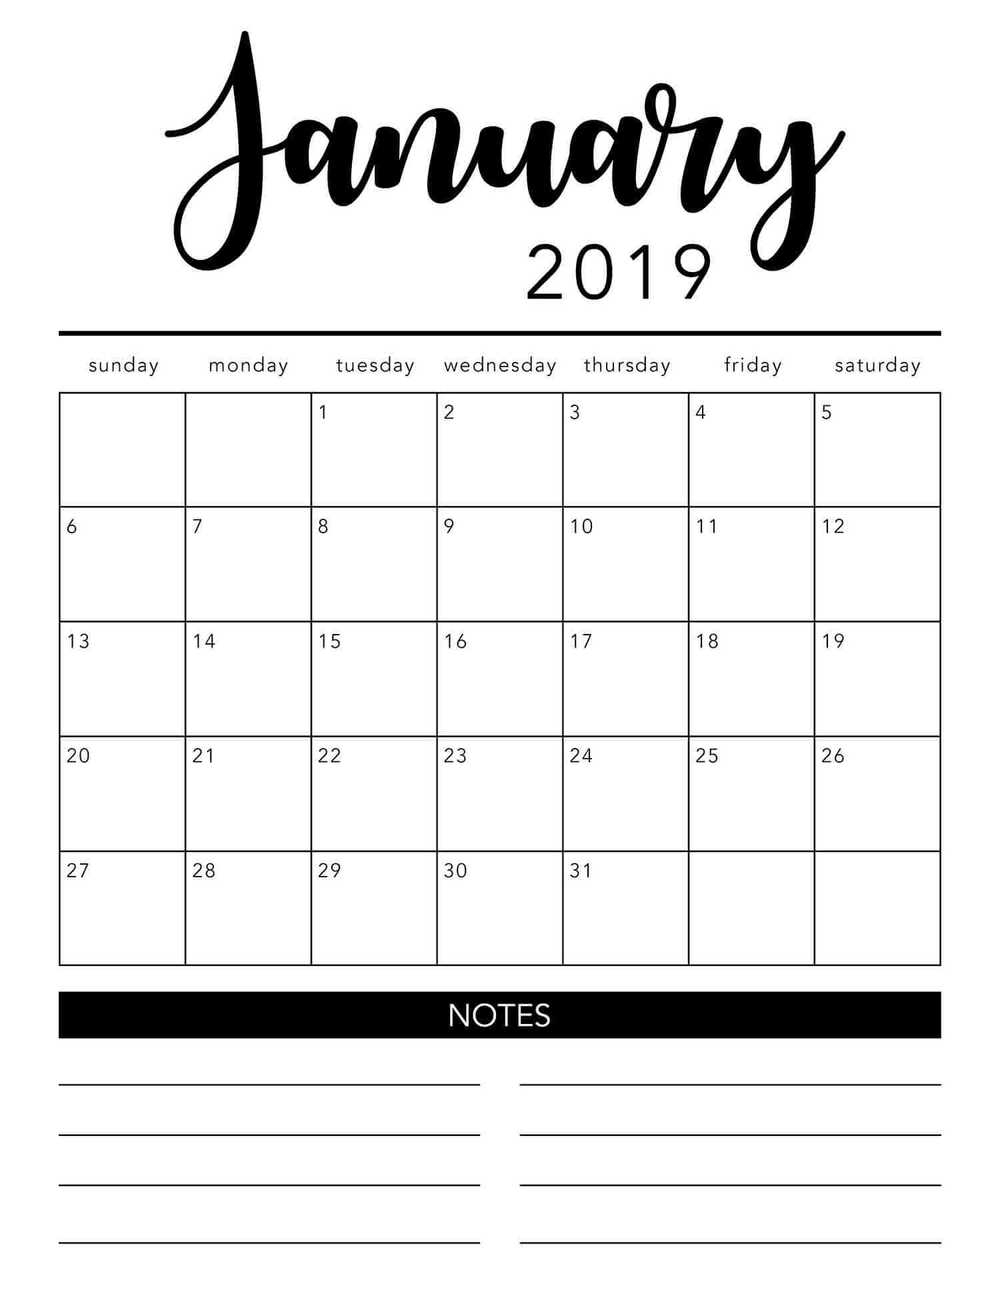 Free 2019 Printable Calendar Template (2 Colors!) - I Heart Naptime with Blank Calendar To Fill In Free